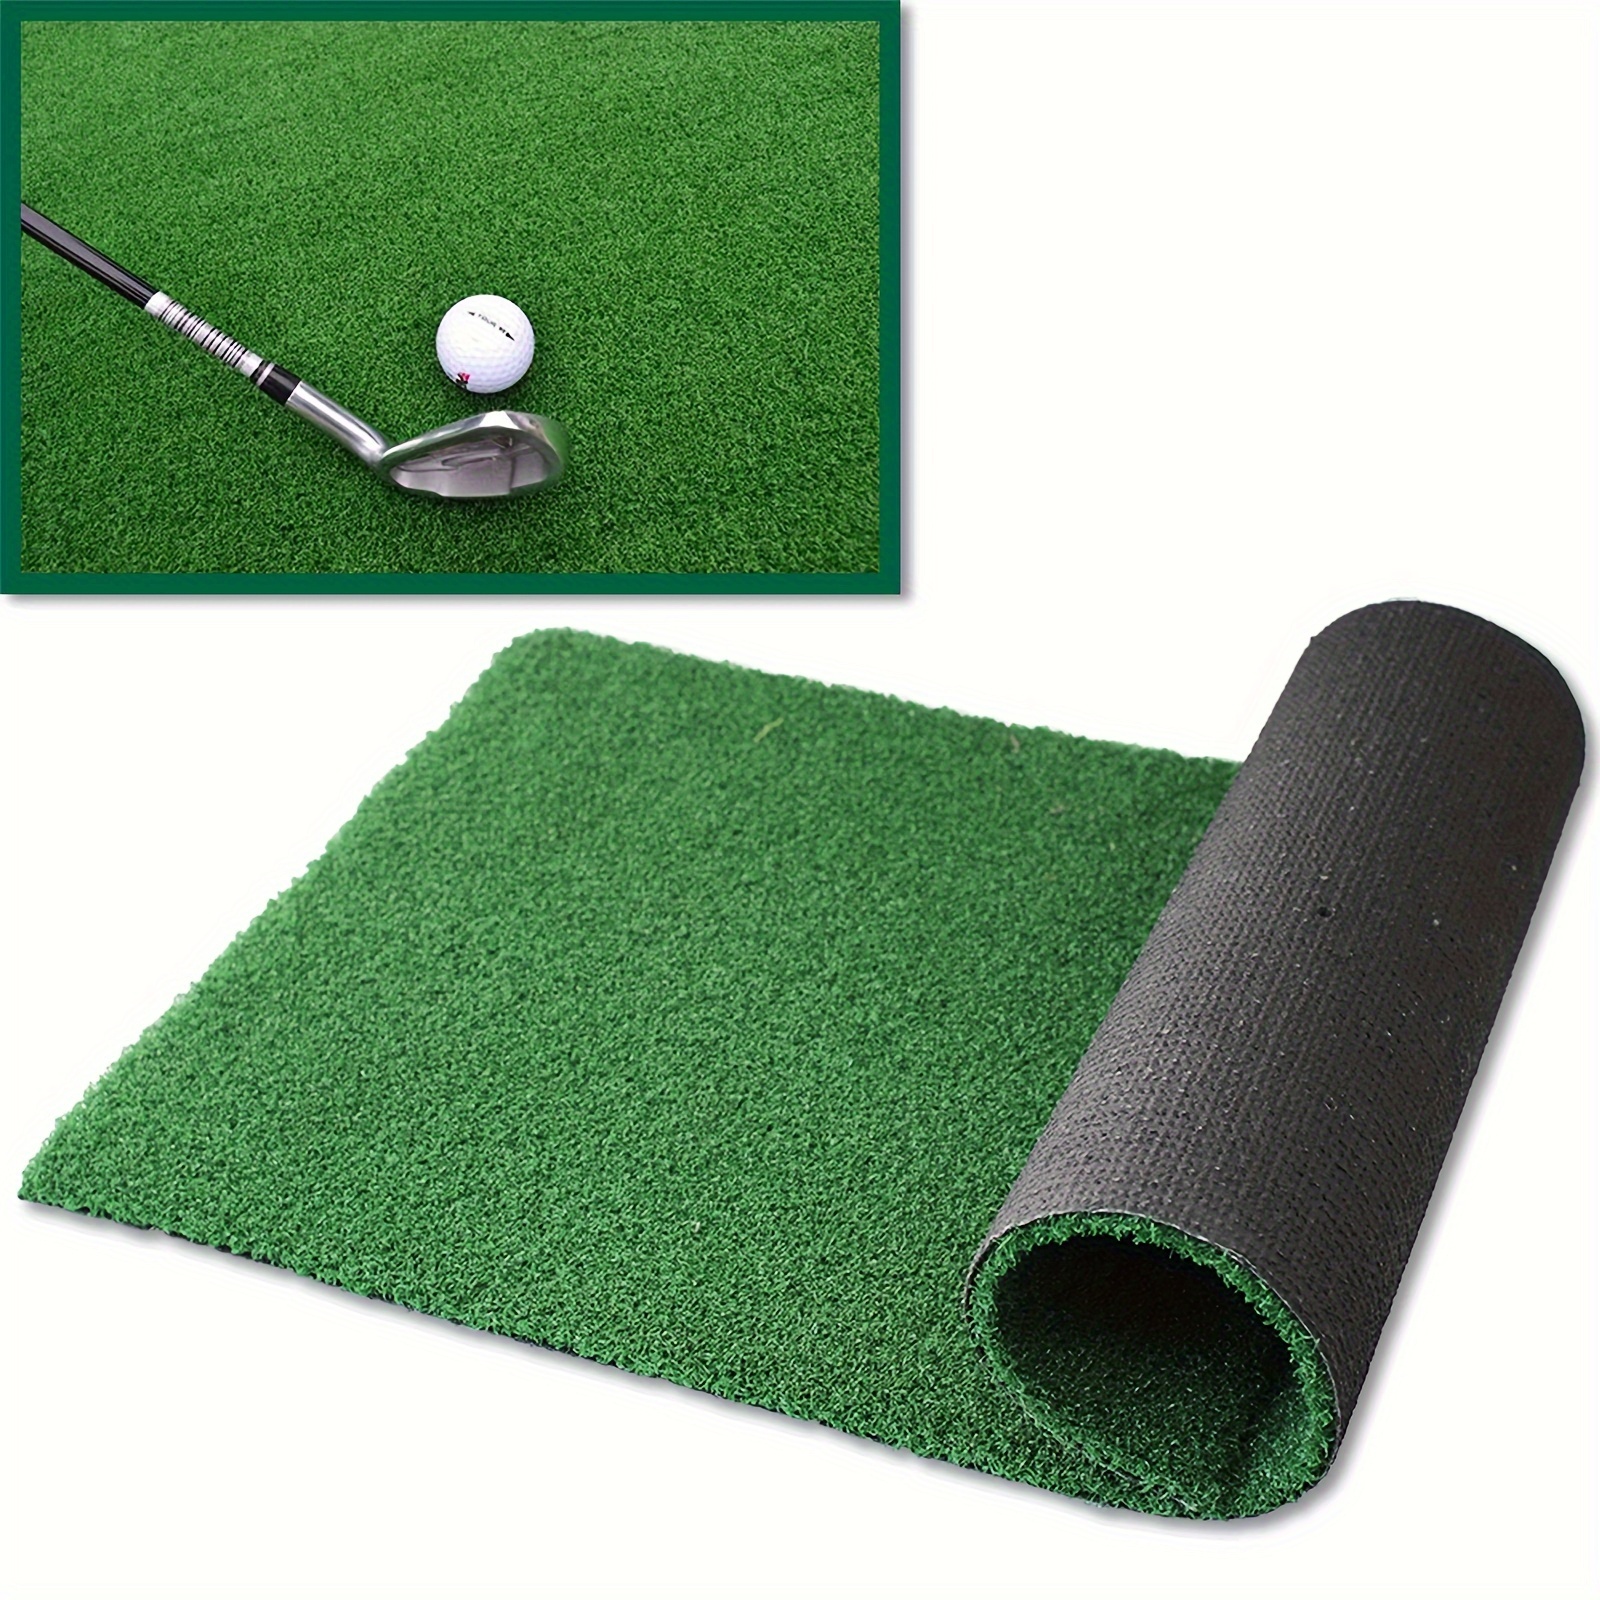 

Golf Putting Green Turf 0.47" Multi-use Artificial Grass Rug Indoor/outdoor Carpet, Golf Hitting Practice Mat At Home, Fake Grass Landscape For Décor